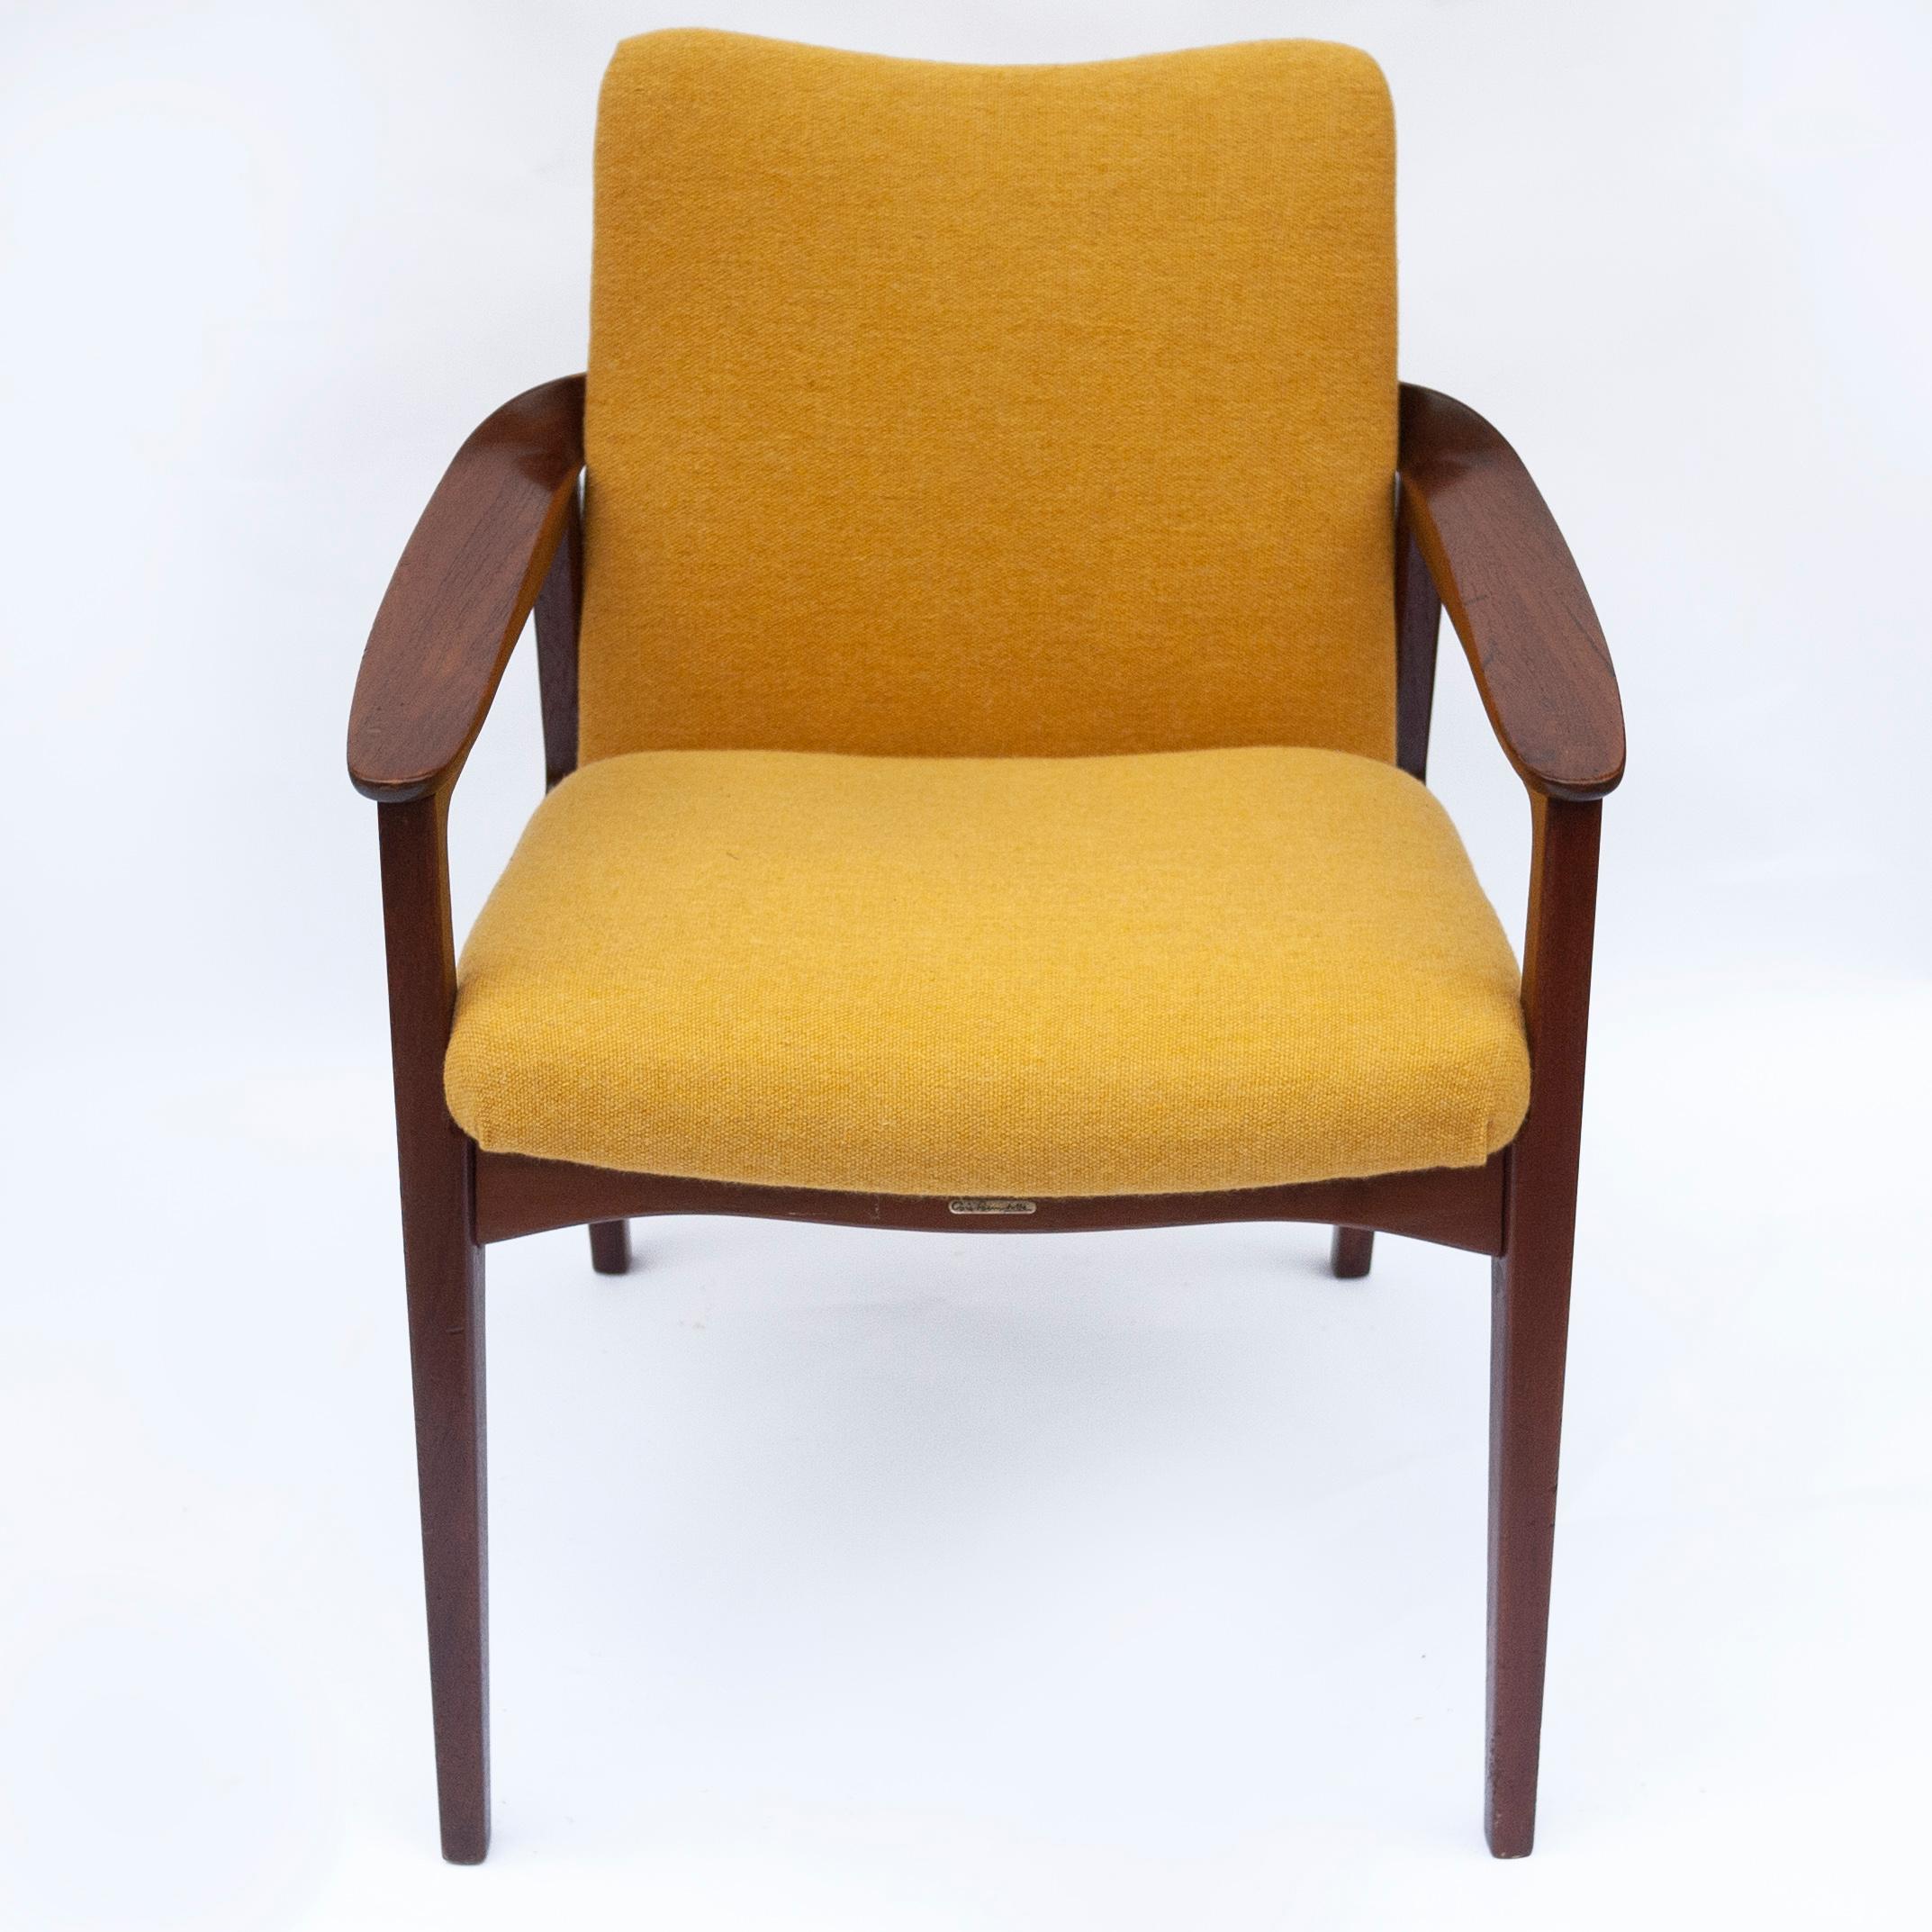 An armchair designed by Sigvard Bernadotte and manufactured by France and son. Sigvard Bernadotte was the uncle of Margrethe the 2nd, Queen of Denmark.
With newly upholstered yellow coloured fabric. Designed and handwoven in London by Robyn